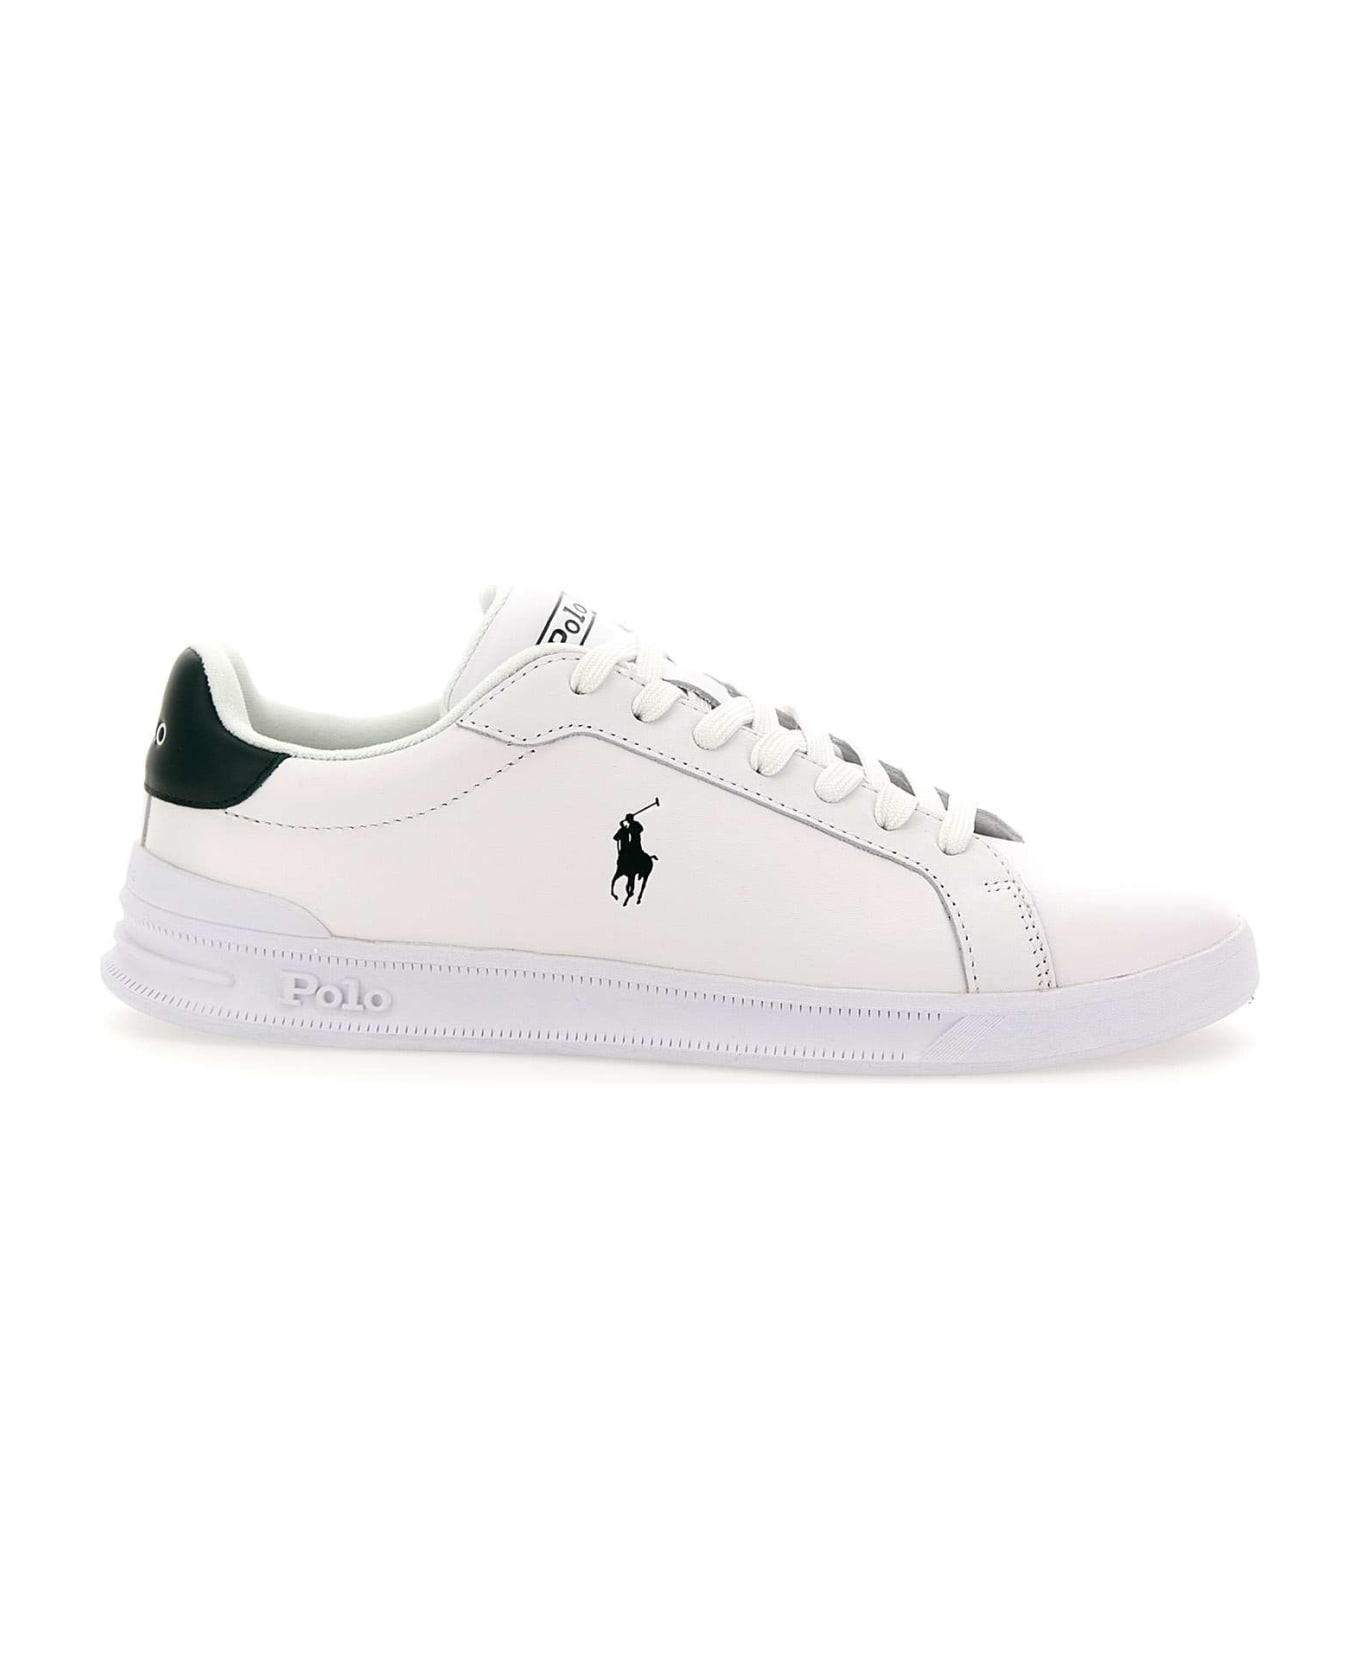 Polo Ralph Lauren "heritage Court" Leather Sneakers - WHITE